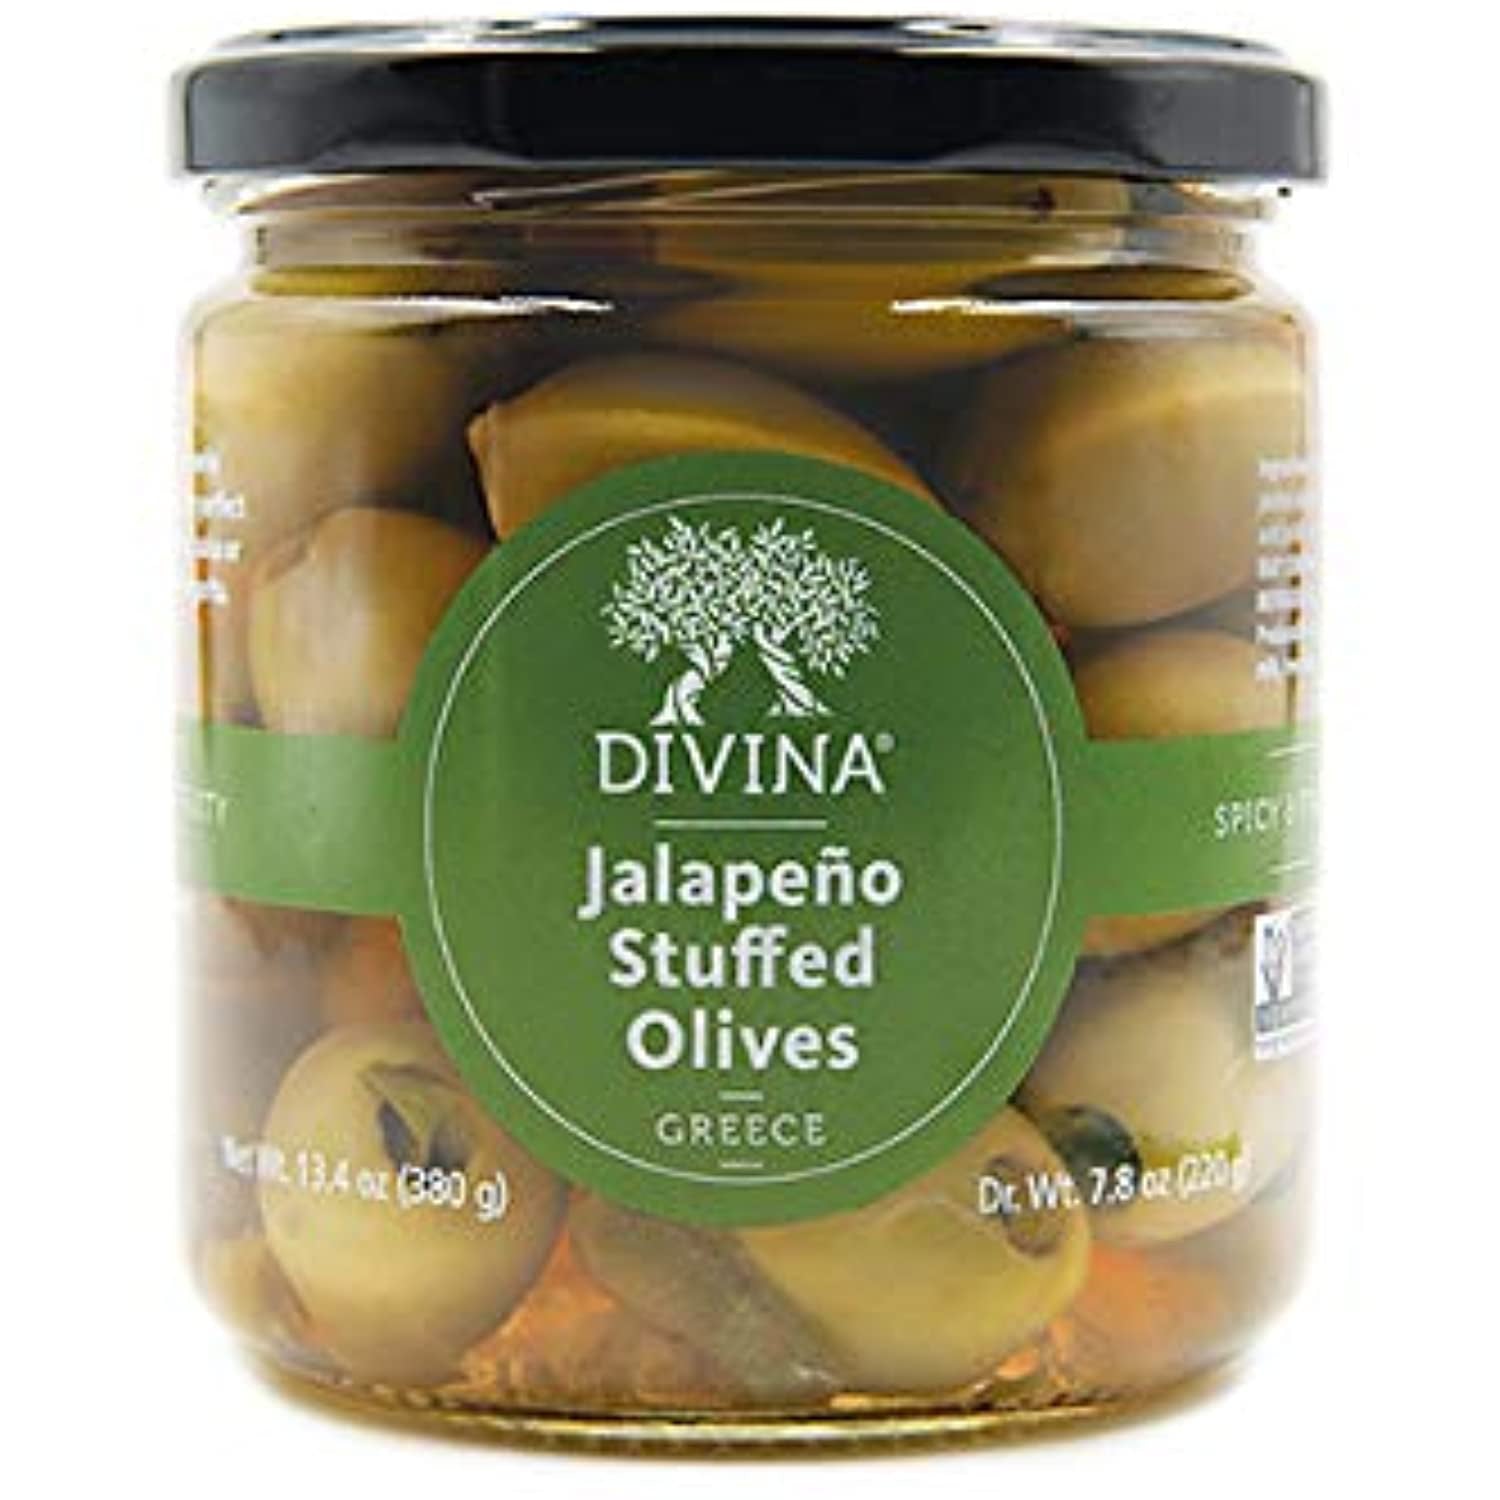 Divina Green Olives Stuffed With Jalapeno Peppers 7.8oz 6ct